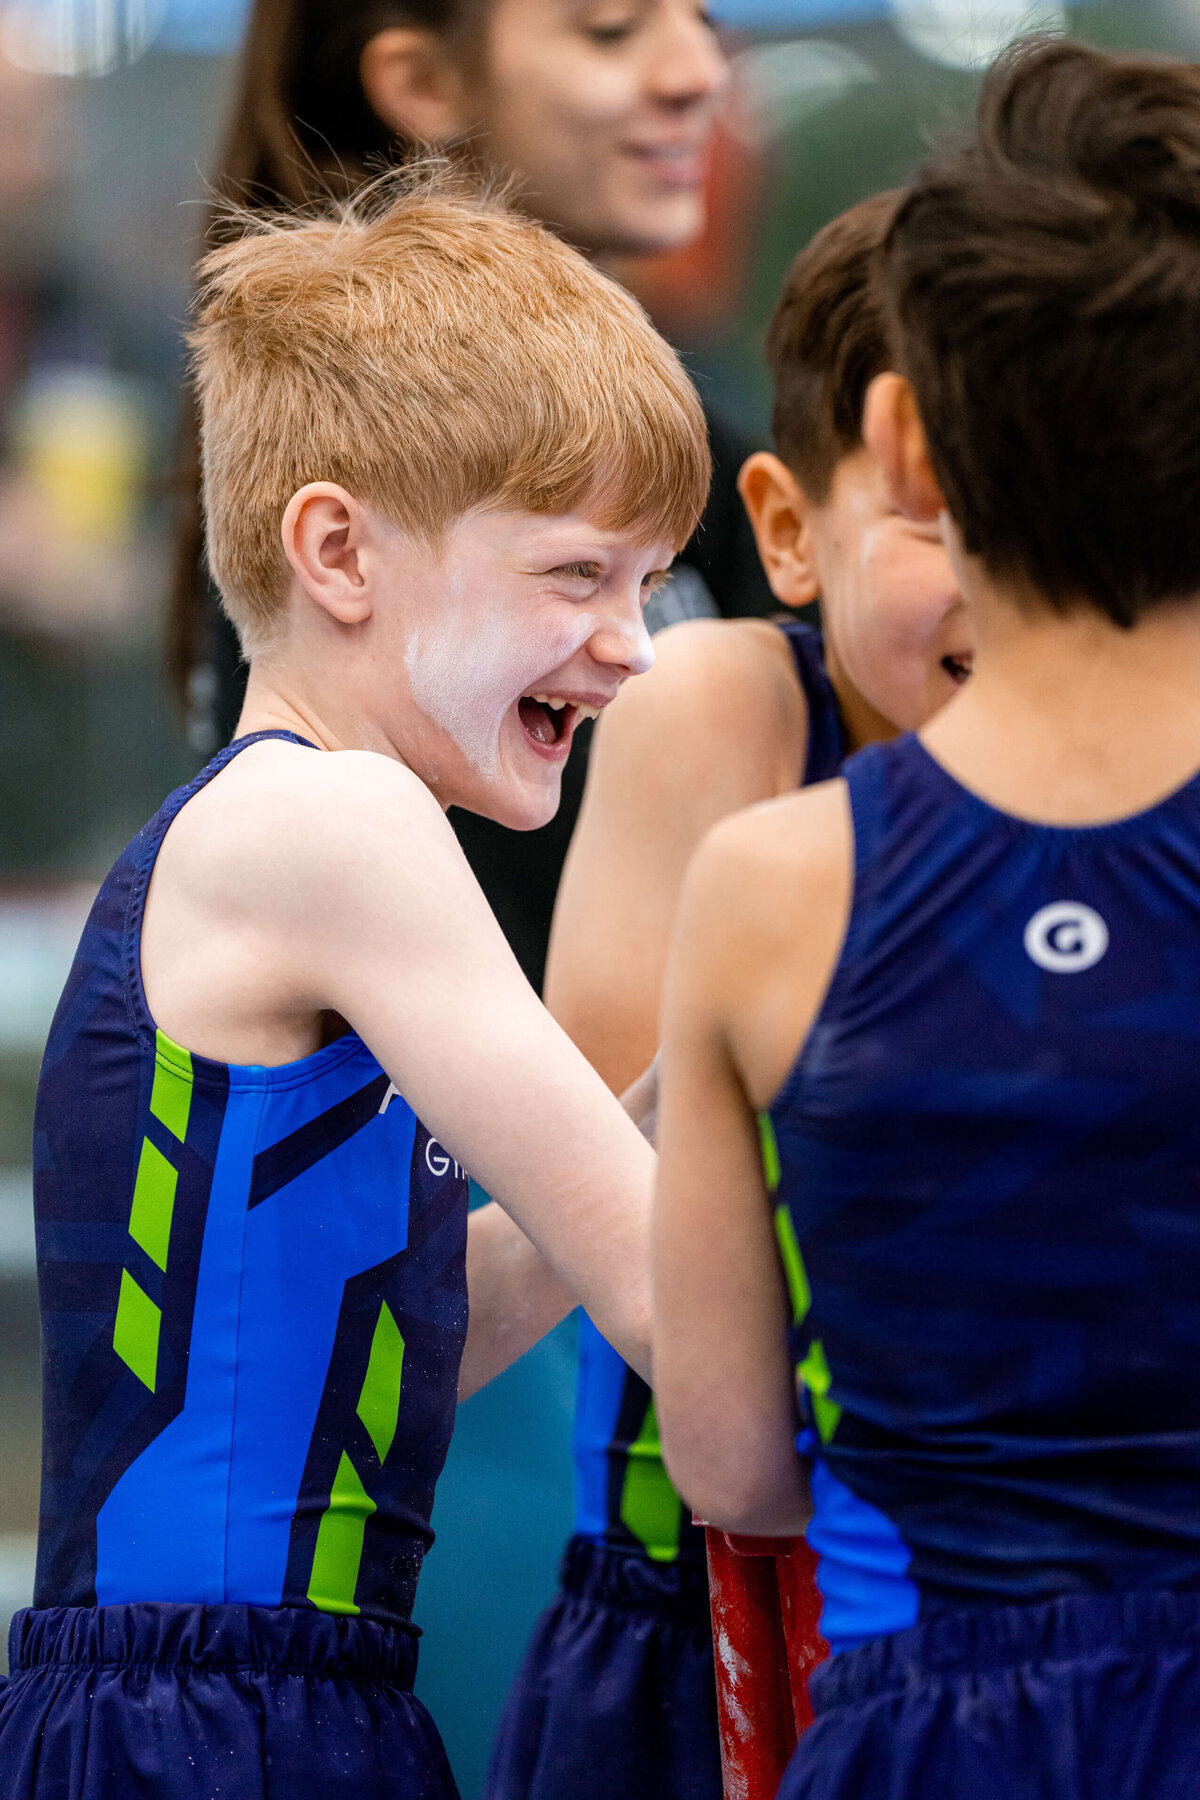 Photo by Luke O'Geil taken at the 2023 inaugural Grizzly Classic men's artistic gymnastics competitionA1_08186